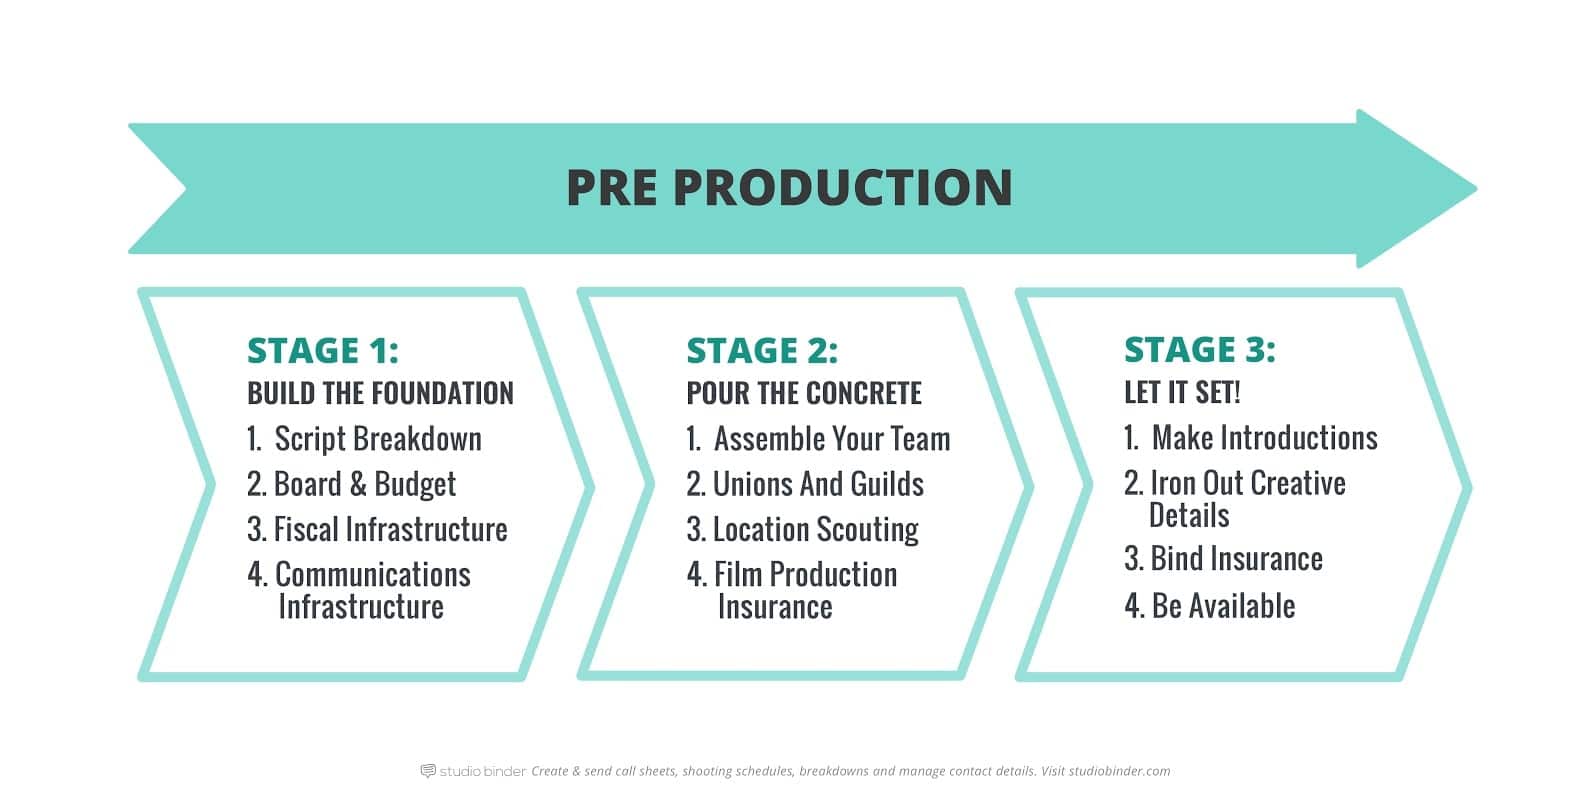 How to Make a Short Film: 3 Proven Steps to Master Pre Production